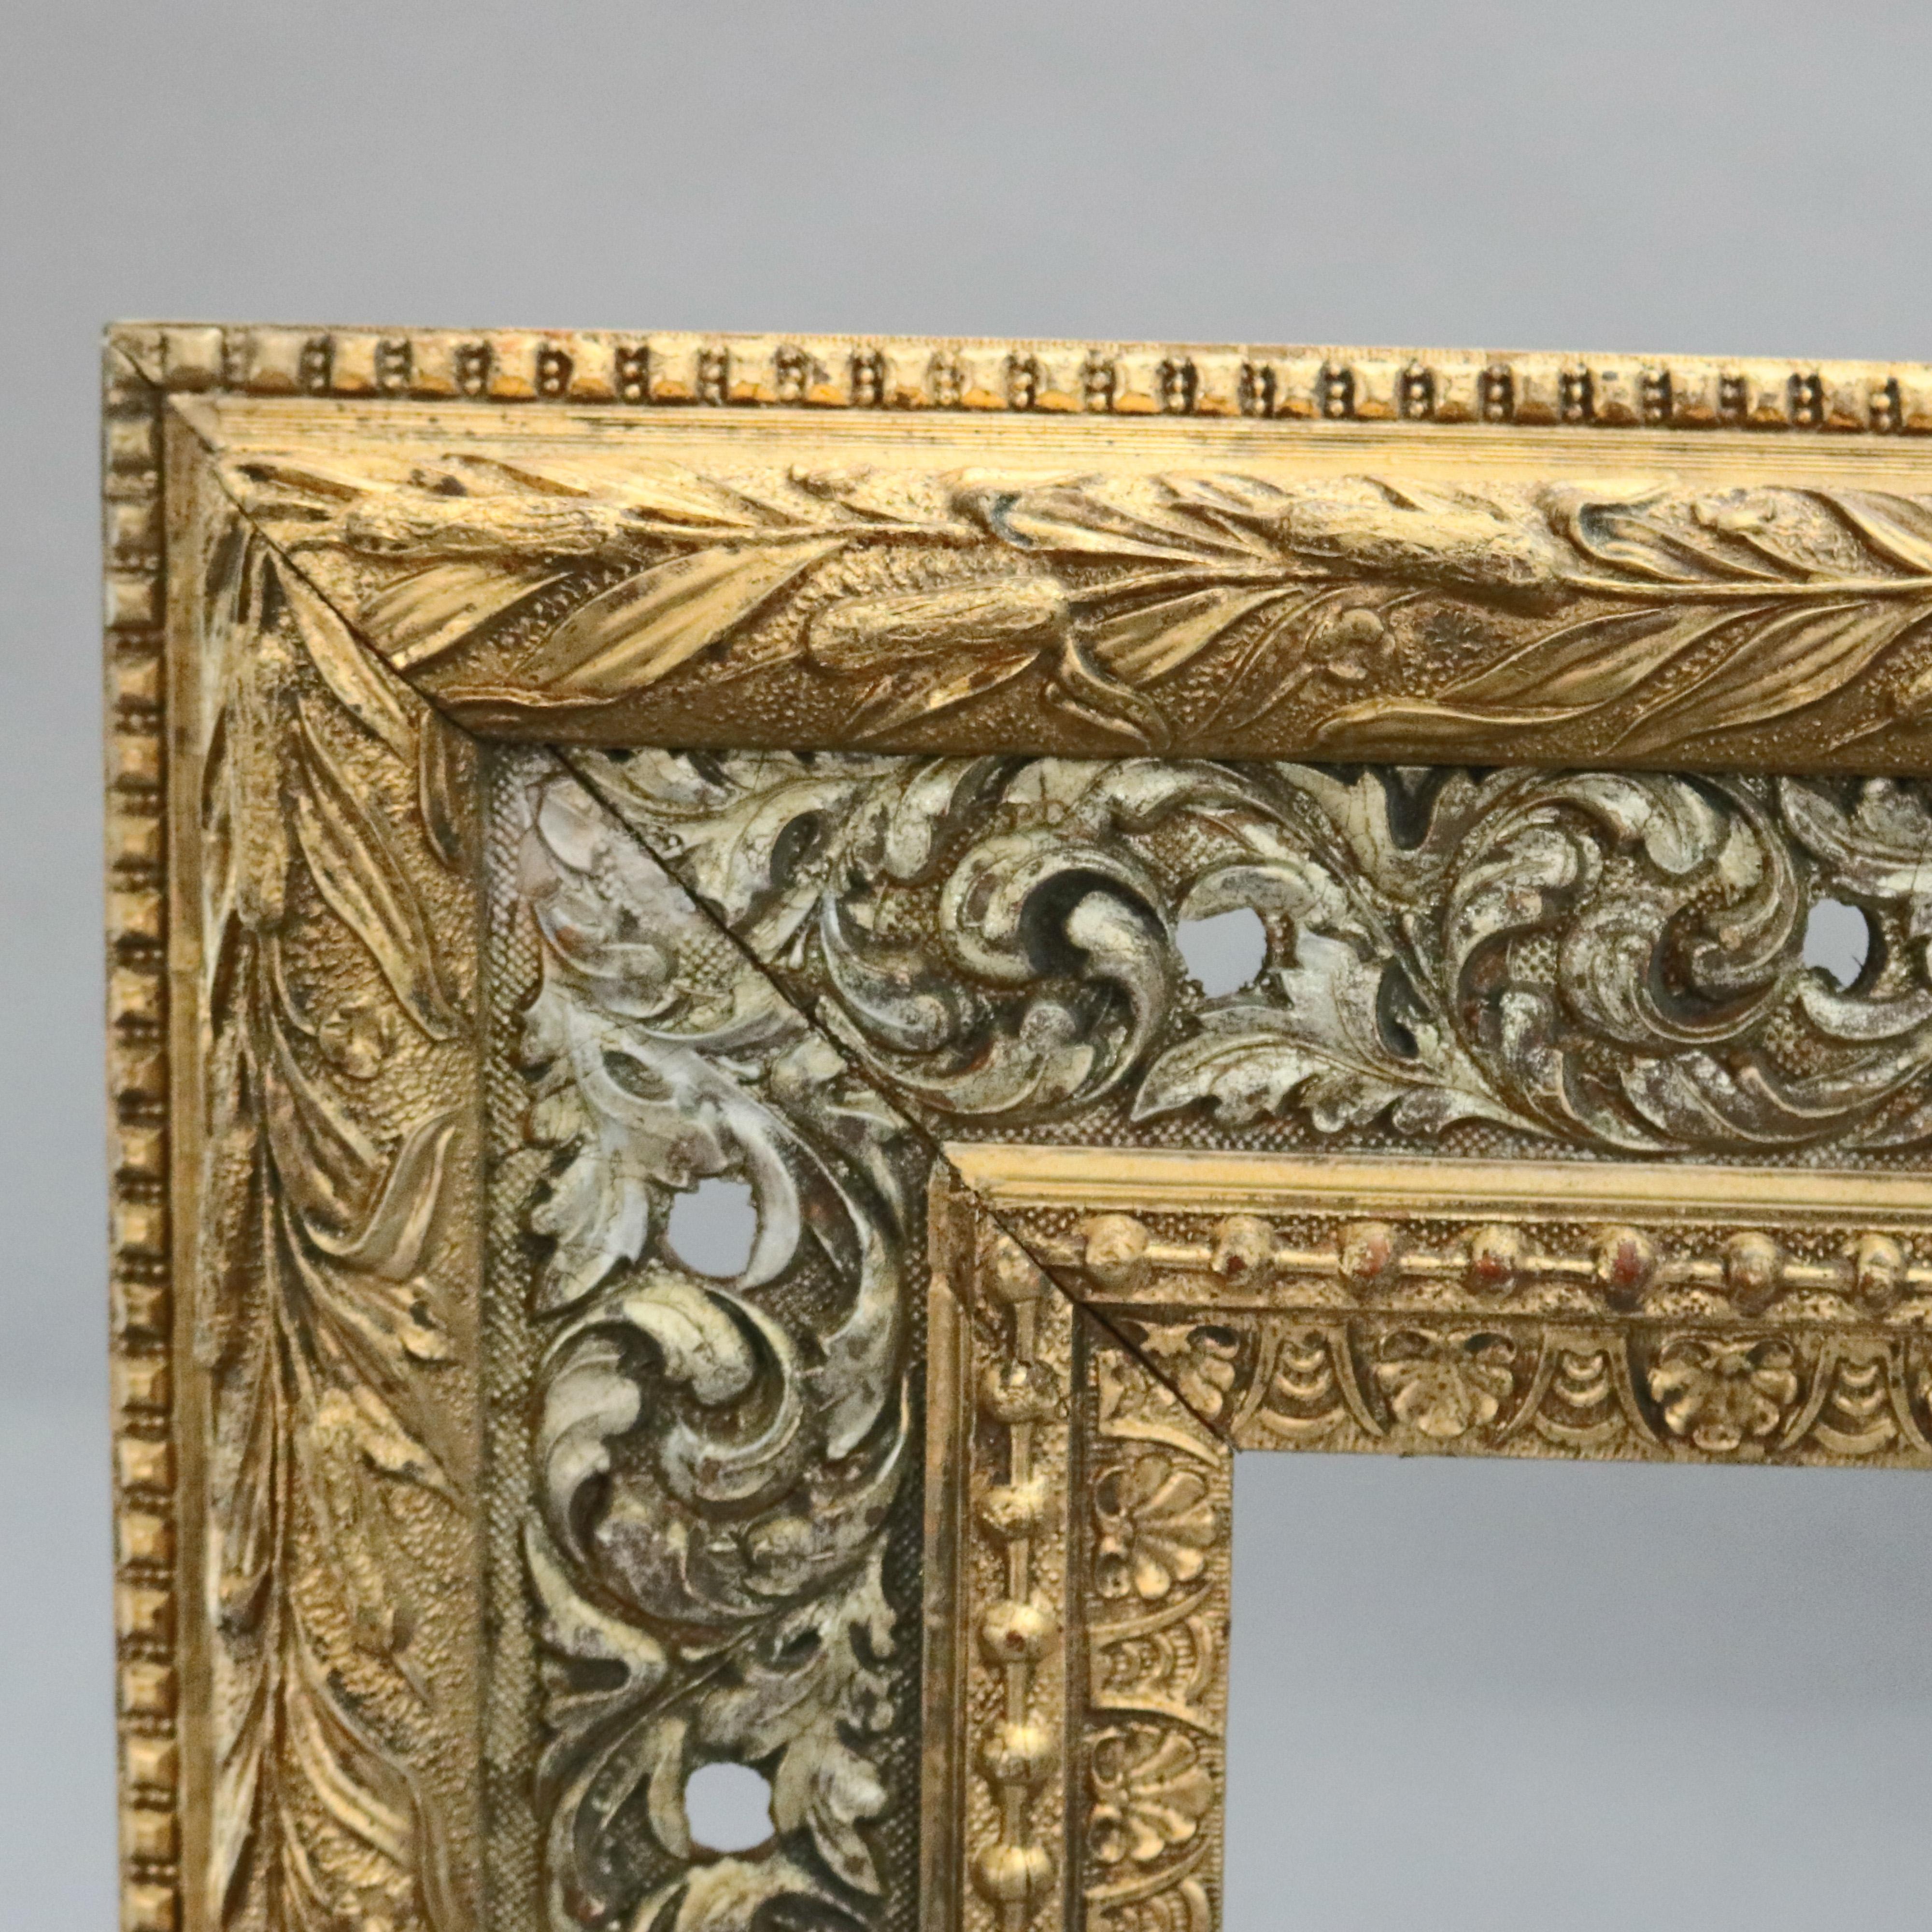 An antique French art frame offers first finish gold and silver giltwood having scroll and foliate pattern in relief, circa 1890

Measures: Overall 33.25